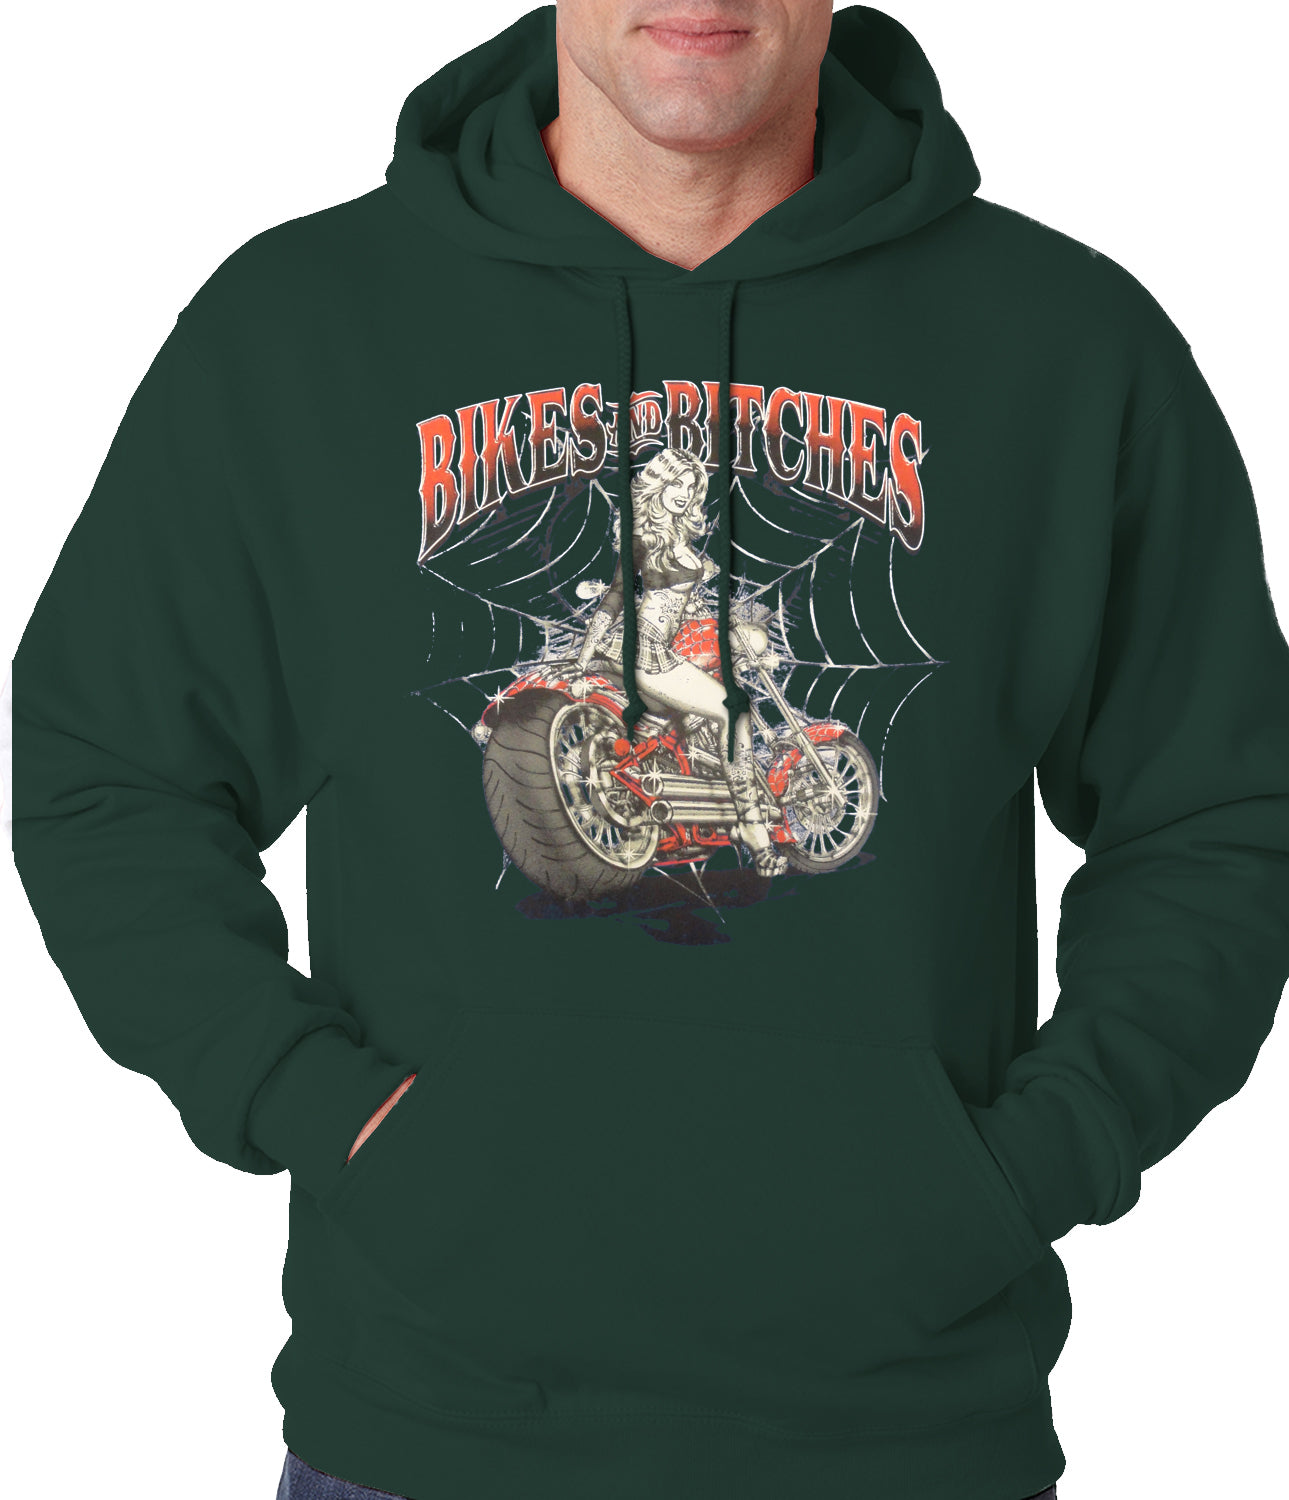 Bikes and B*tches Biker Adult Hoodie Forest Green